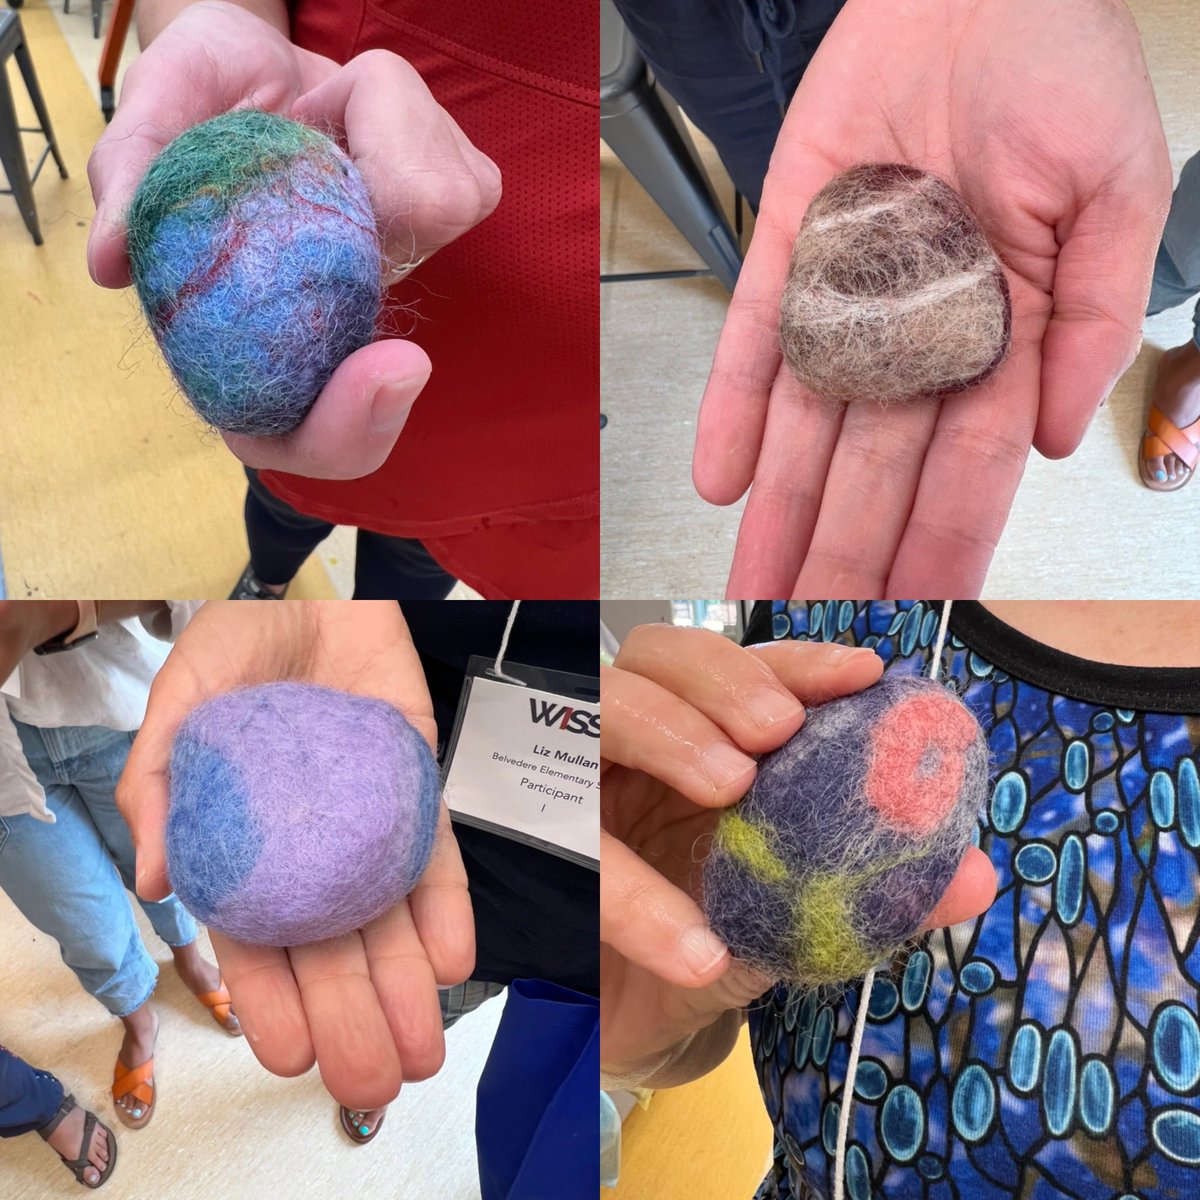 Underneath each beautiful wooly weighted magic is a rock with a mantra. Made with love & joy at #arthappens #wissit22. Some mantras tucked inside are: Laugh, Take risks, Breathe, I belong, Play, Compassion. A sweet and natural piece to hold and remember. #artheals #joyfulmaking